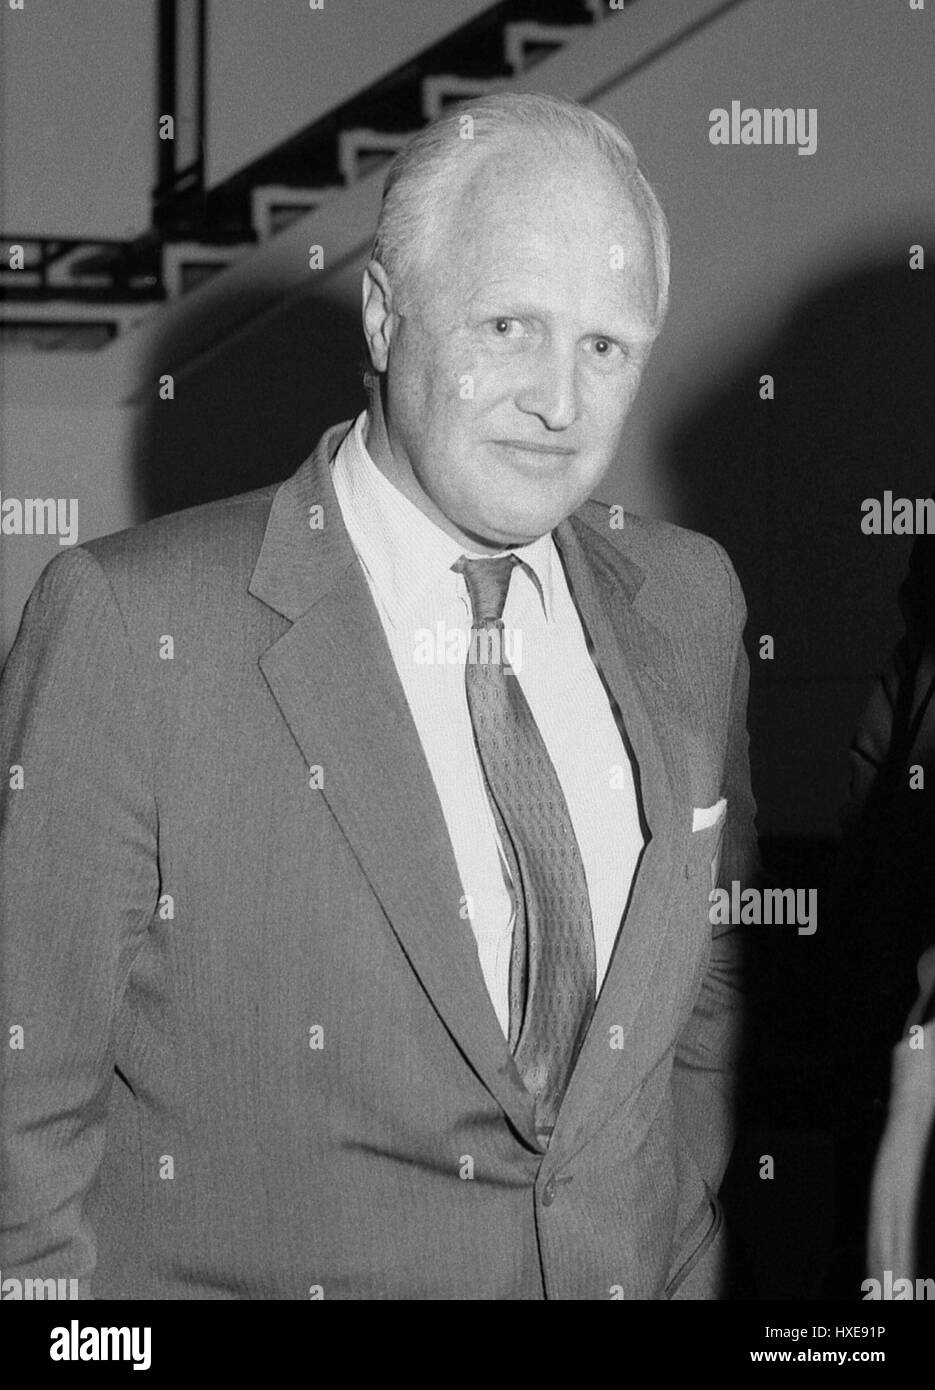 Winston Churchill, Conservative party Member of Parliament for Davyhulme and grandson of the wartime Prime Minister, attends an event in London, England on April 17, 1991. Stock Photo